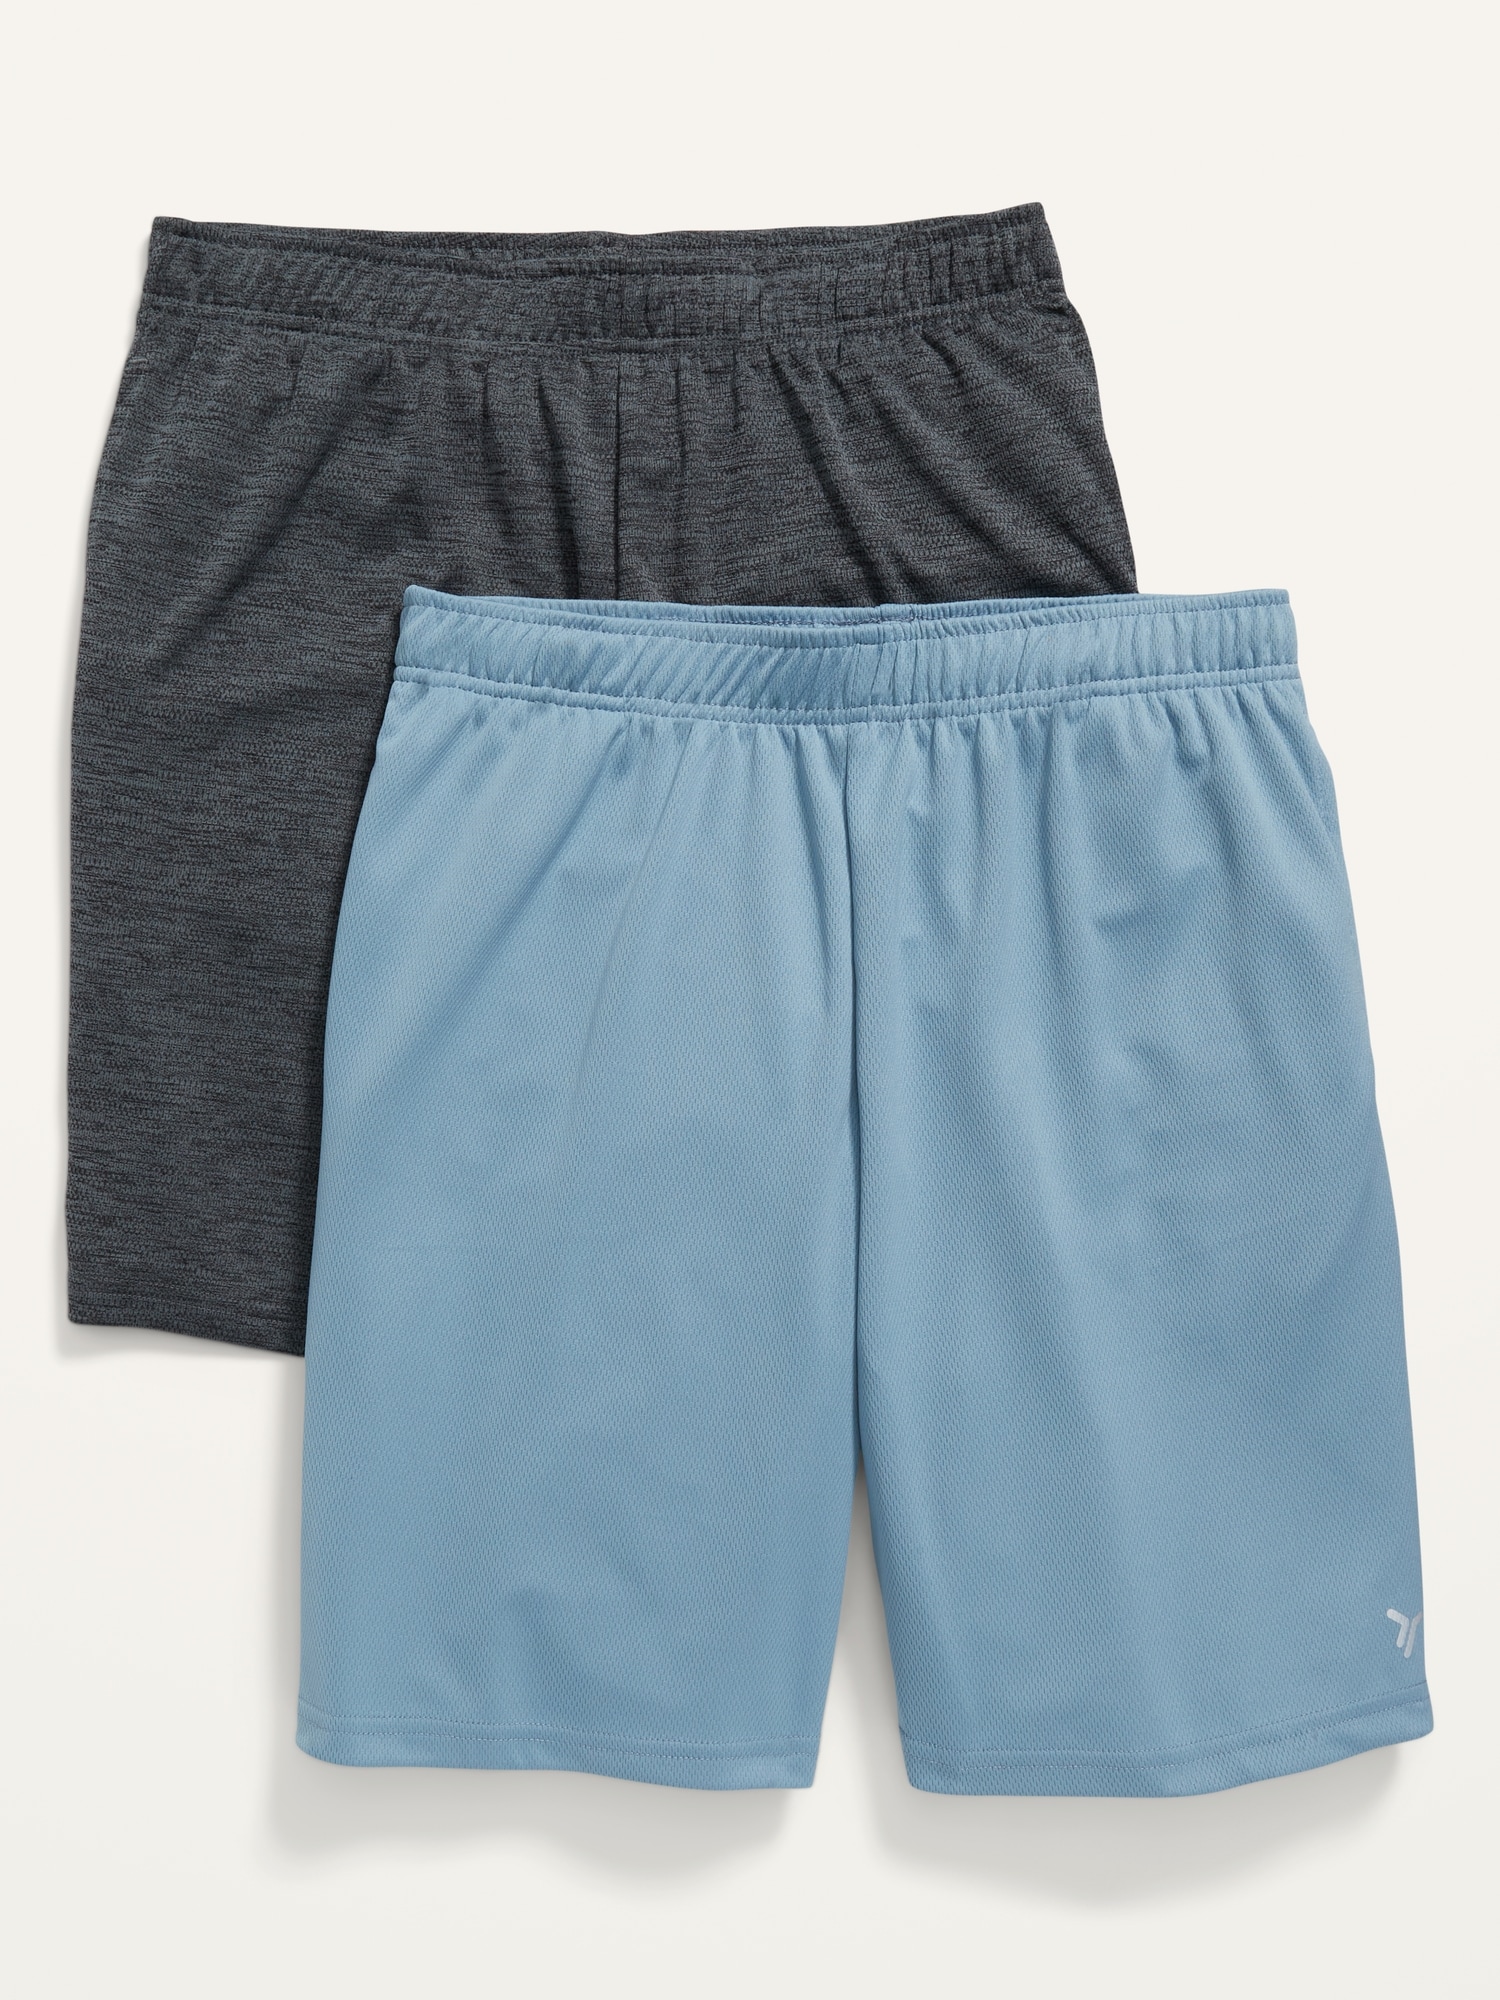 Go-Dry Mesh Performance Shorts 2-Pack -- 9-inch inseam | Old Navy